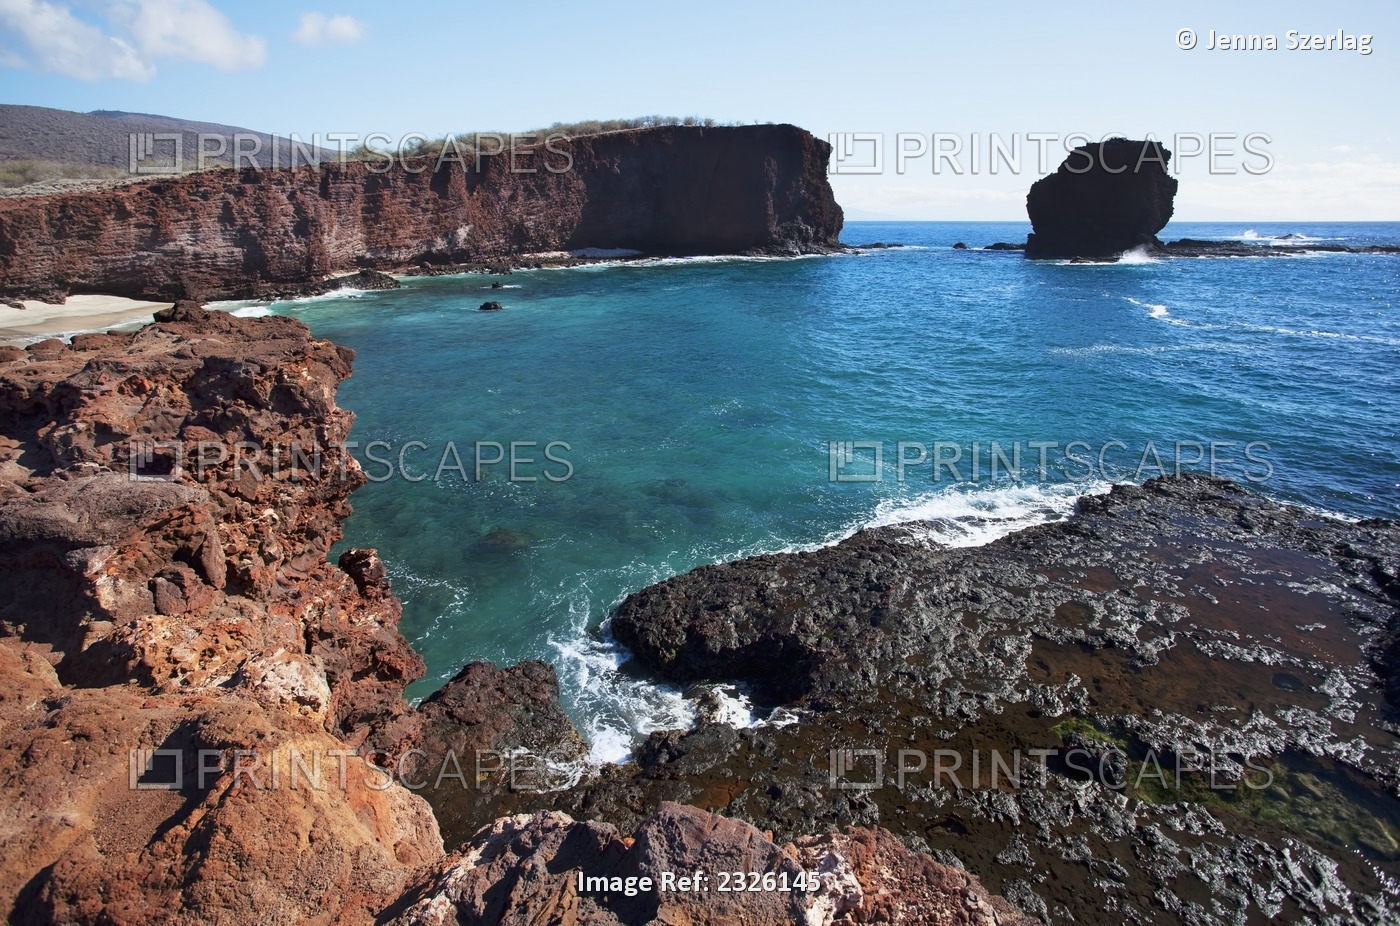 A view of cliffs at sweatheart rock; Lanai, hawaii, united states of america